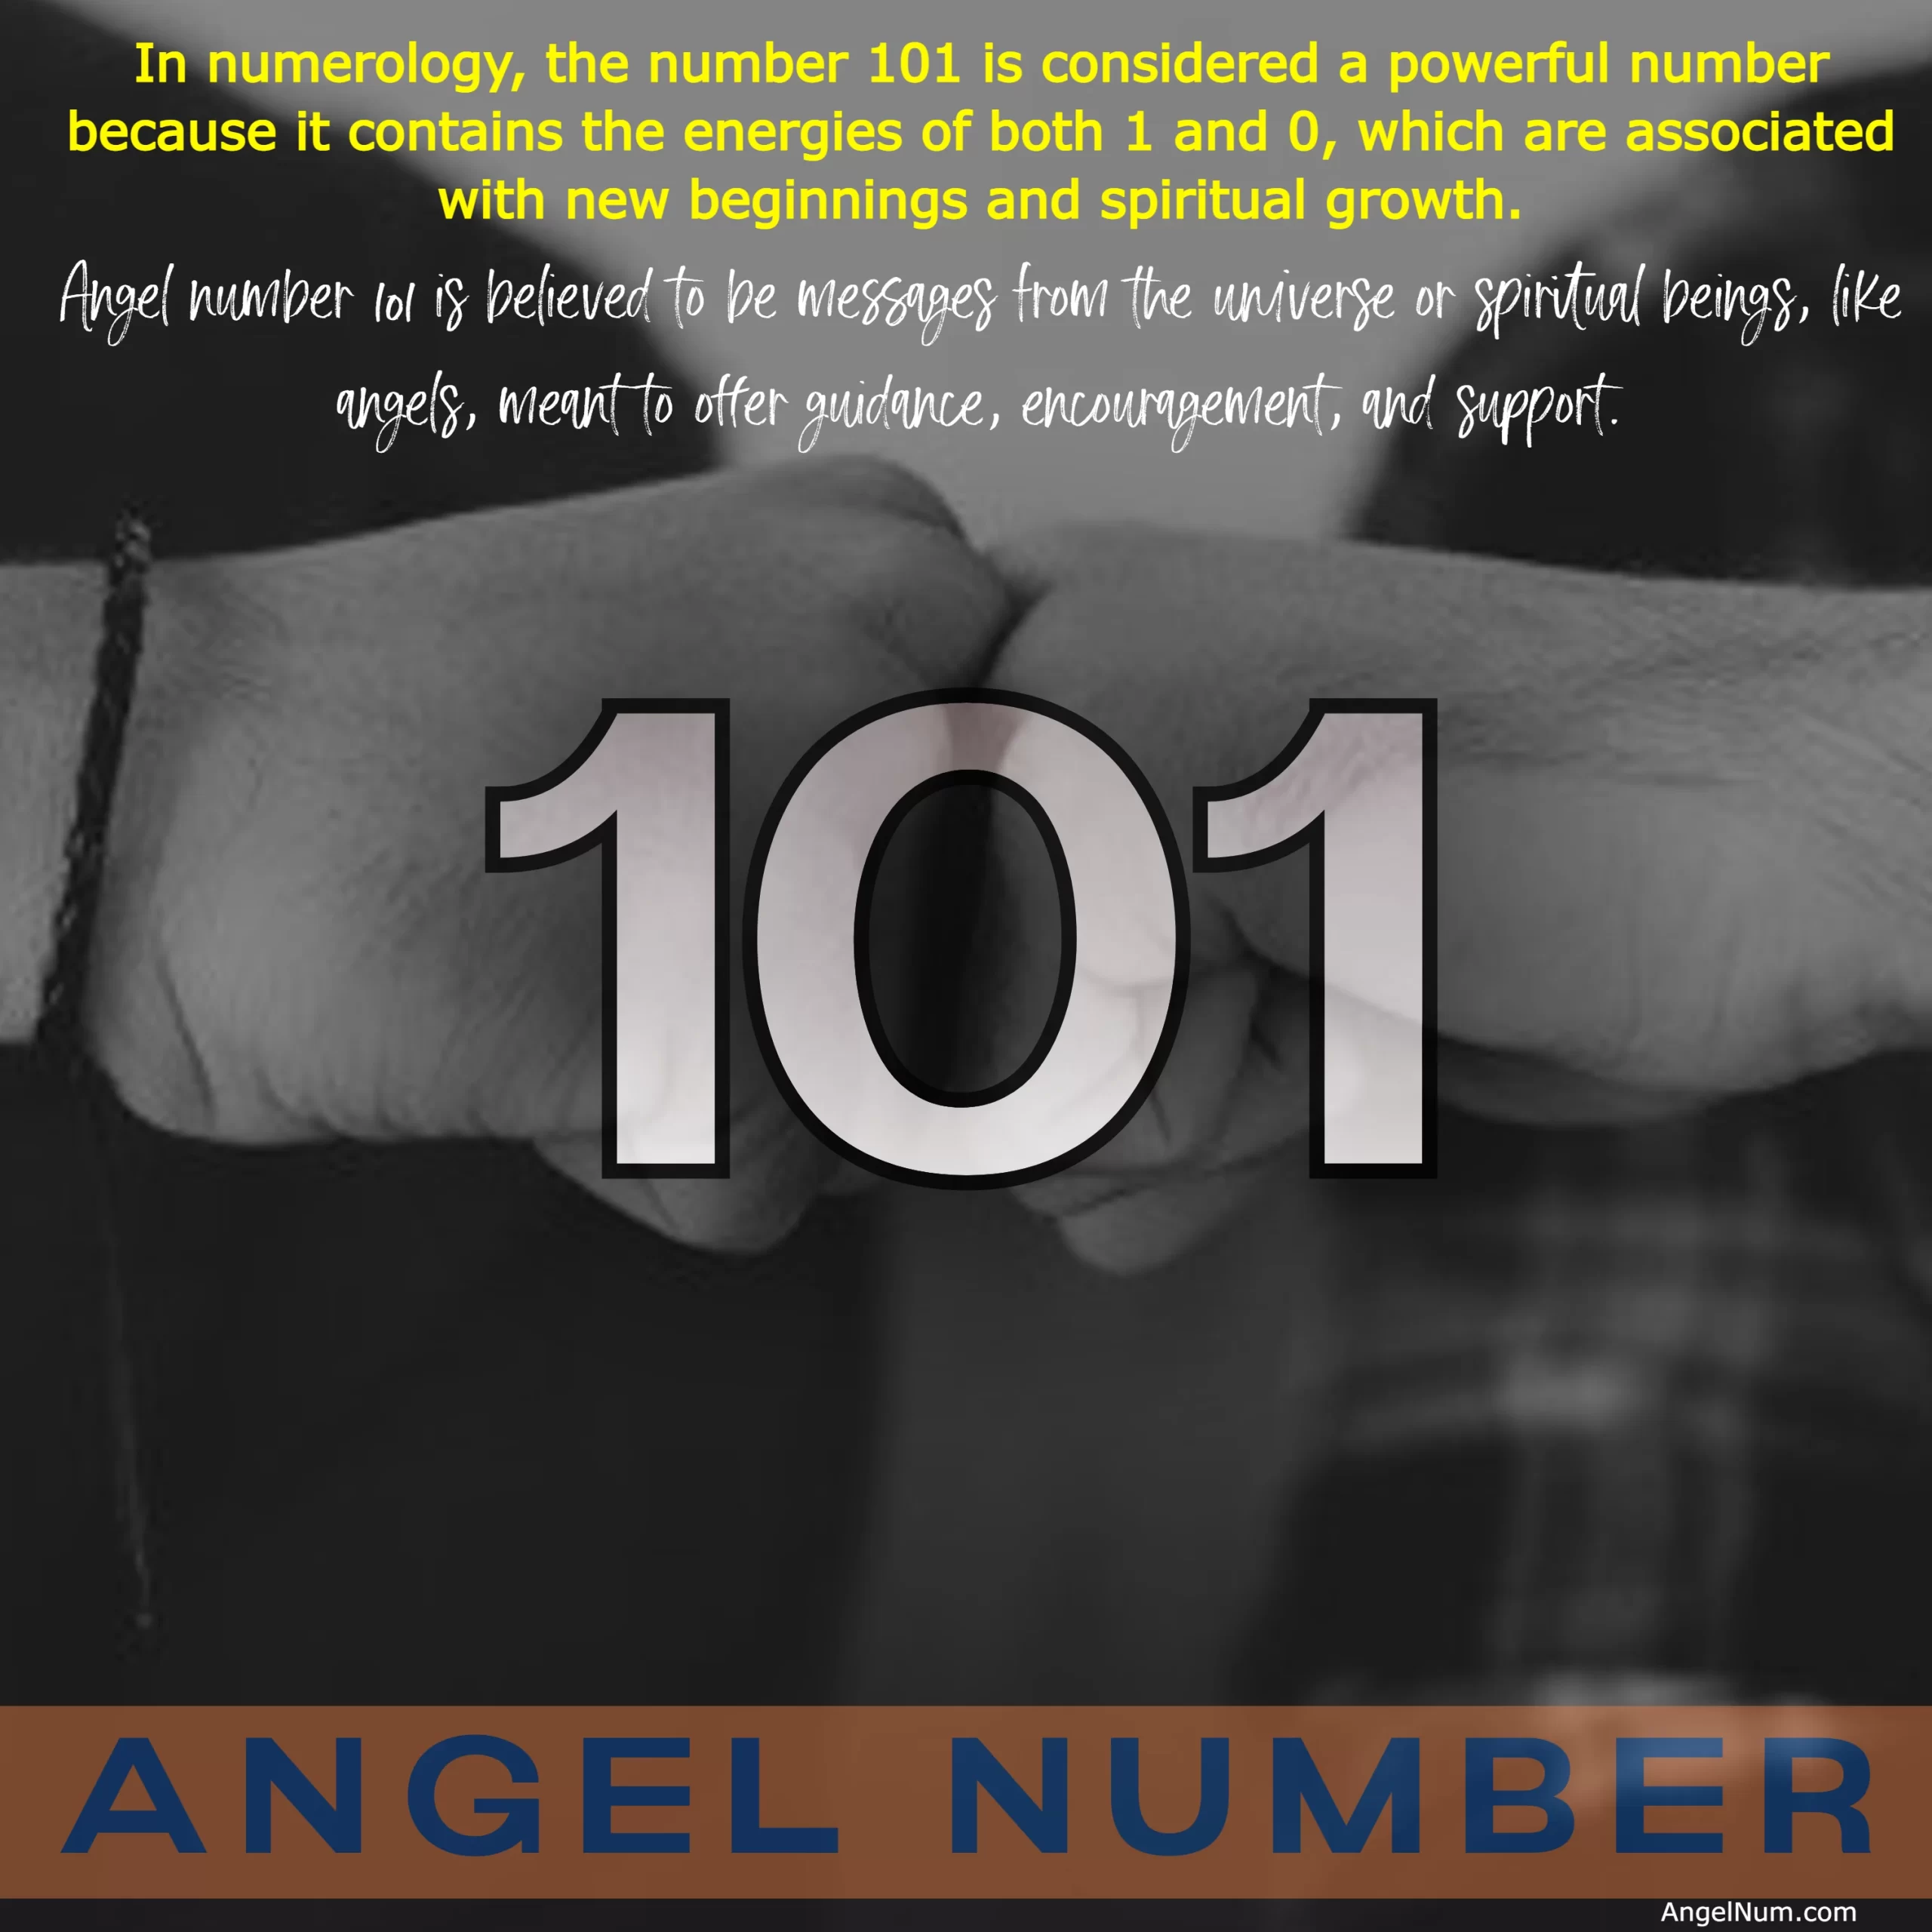 Discover the Divine Guidance of Angel Number 101